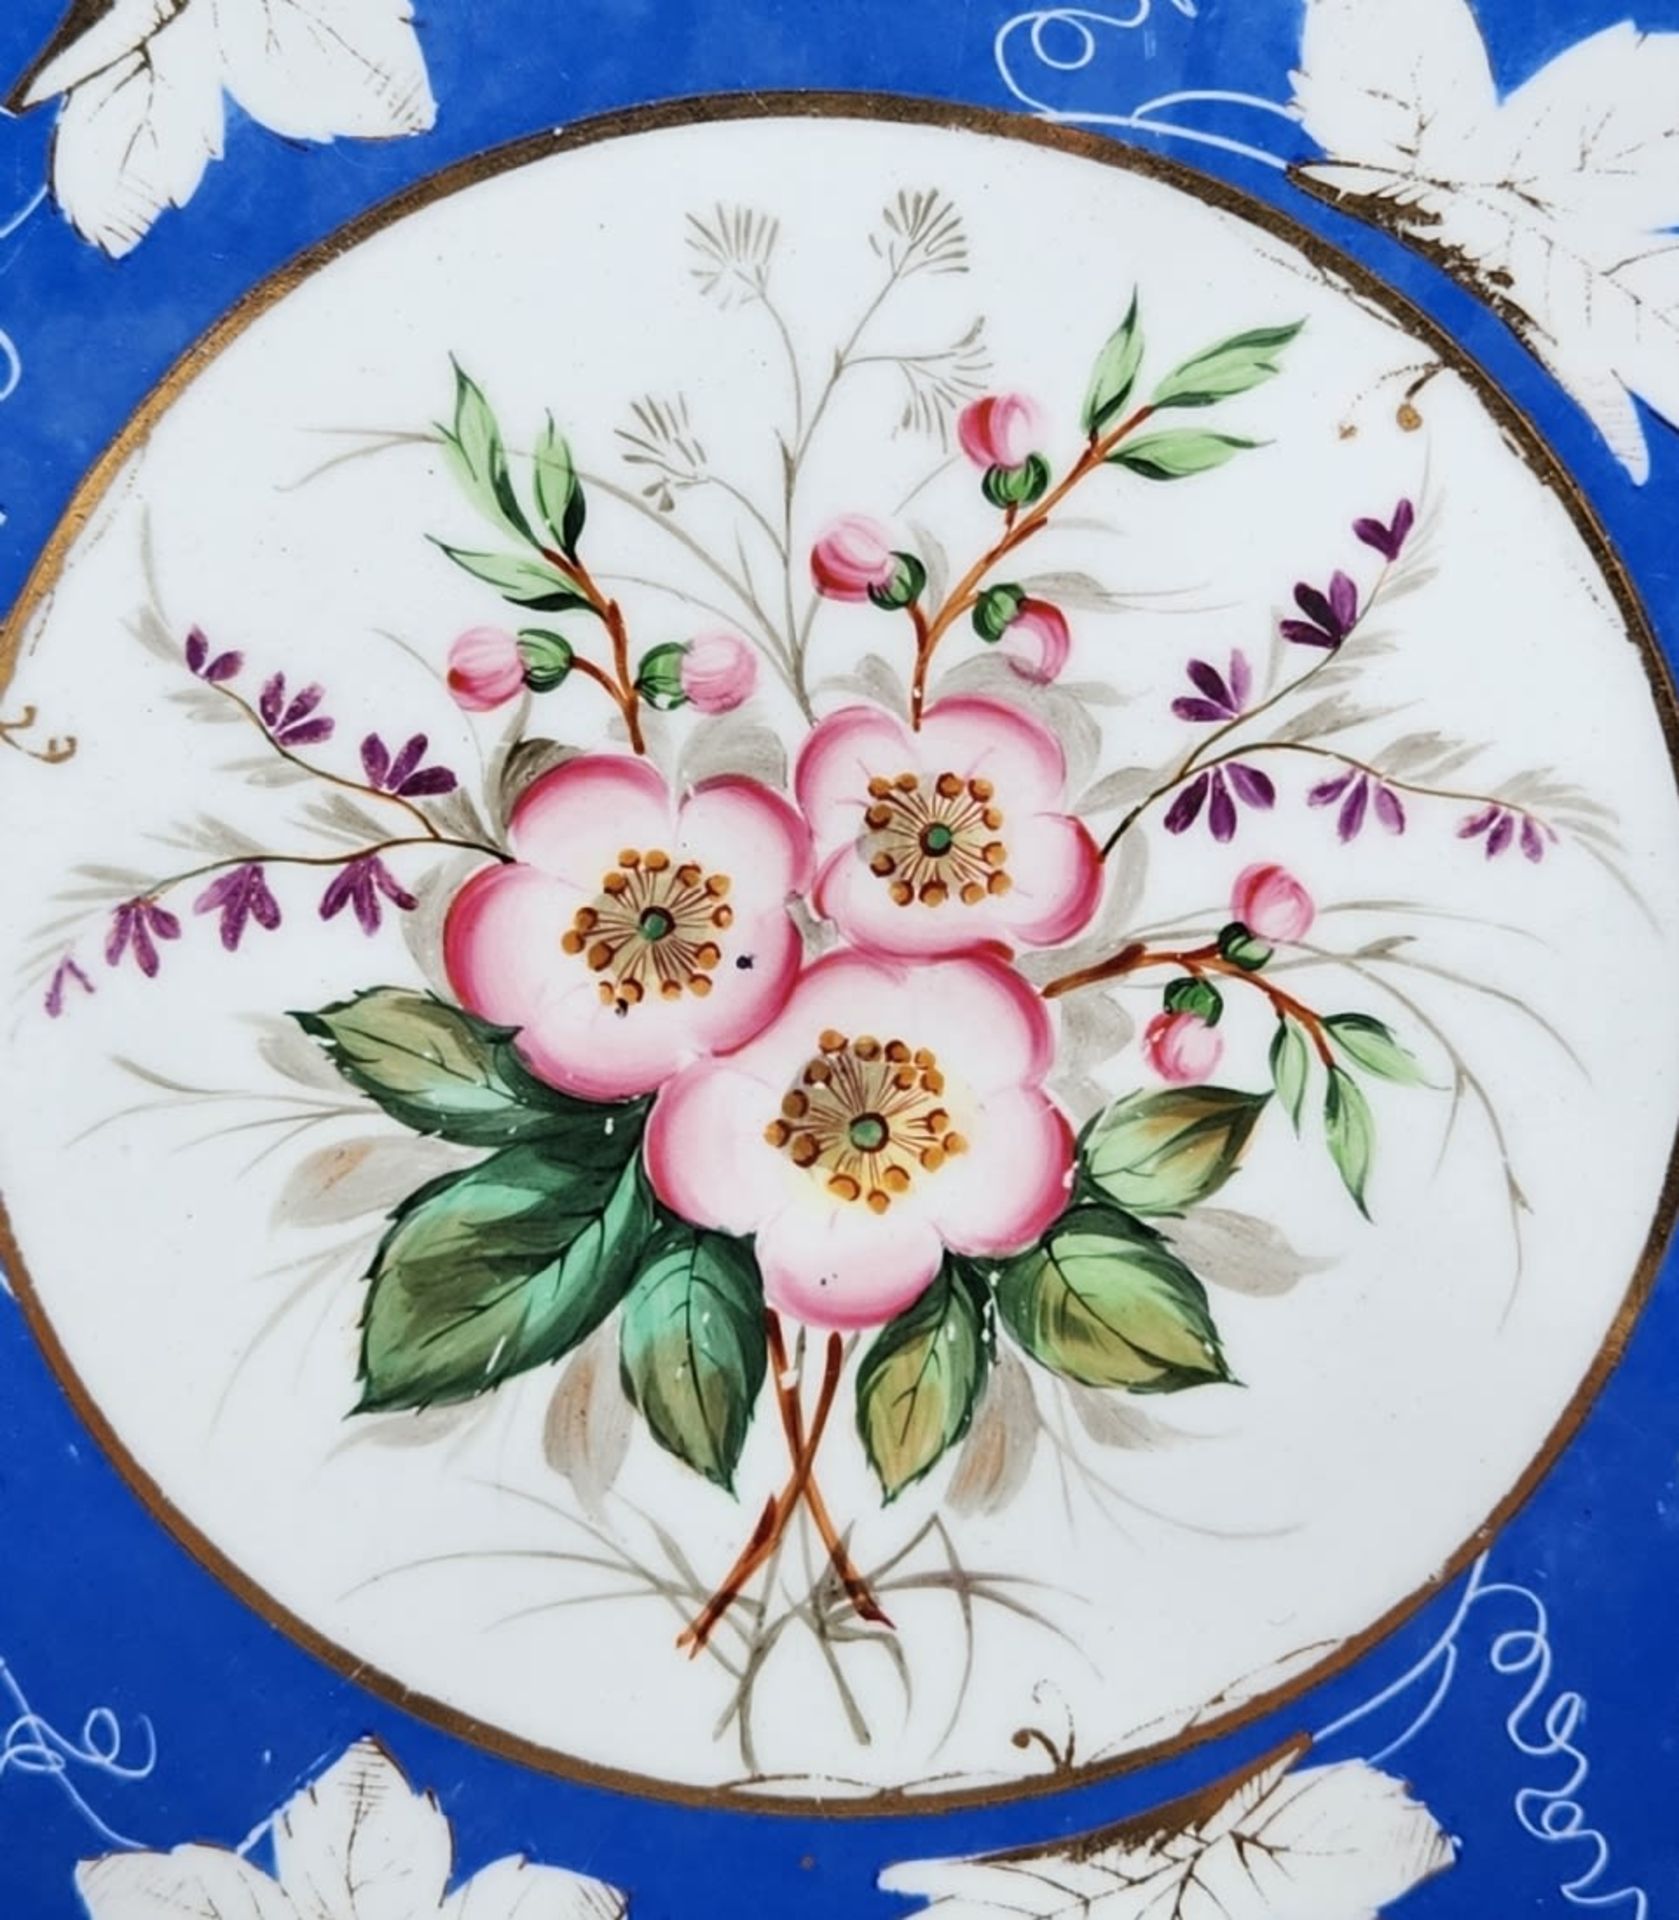 Bukhari porcelain plate, decorated with a floral hand drawing in polychrome enamel, signed. - Image 2 of 5